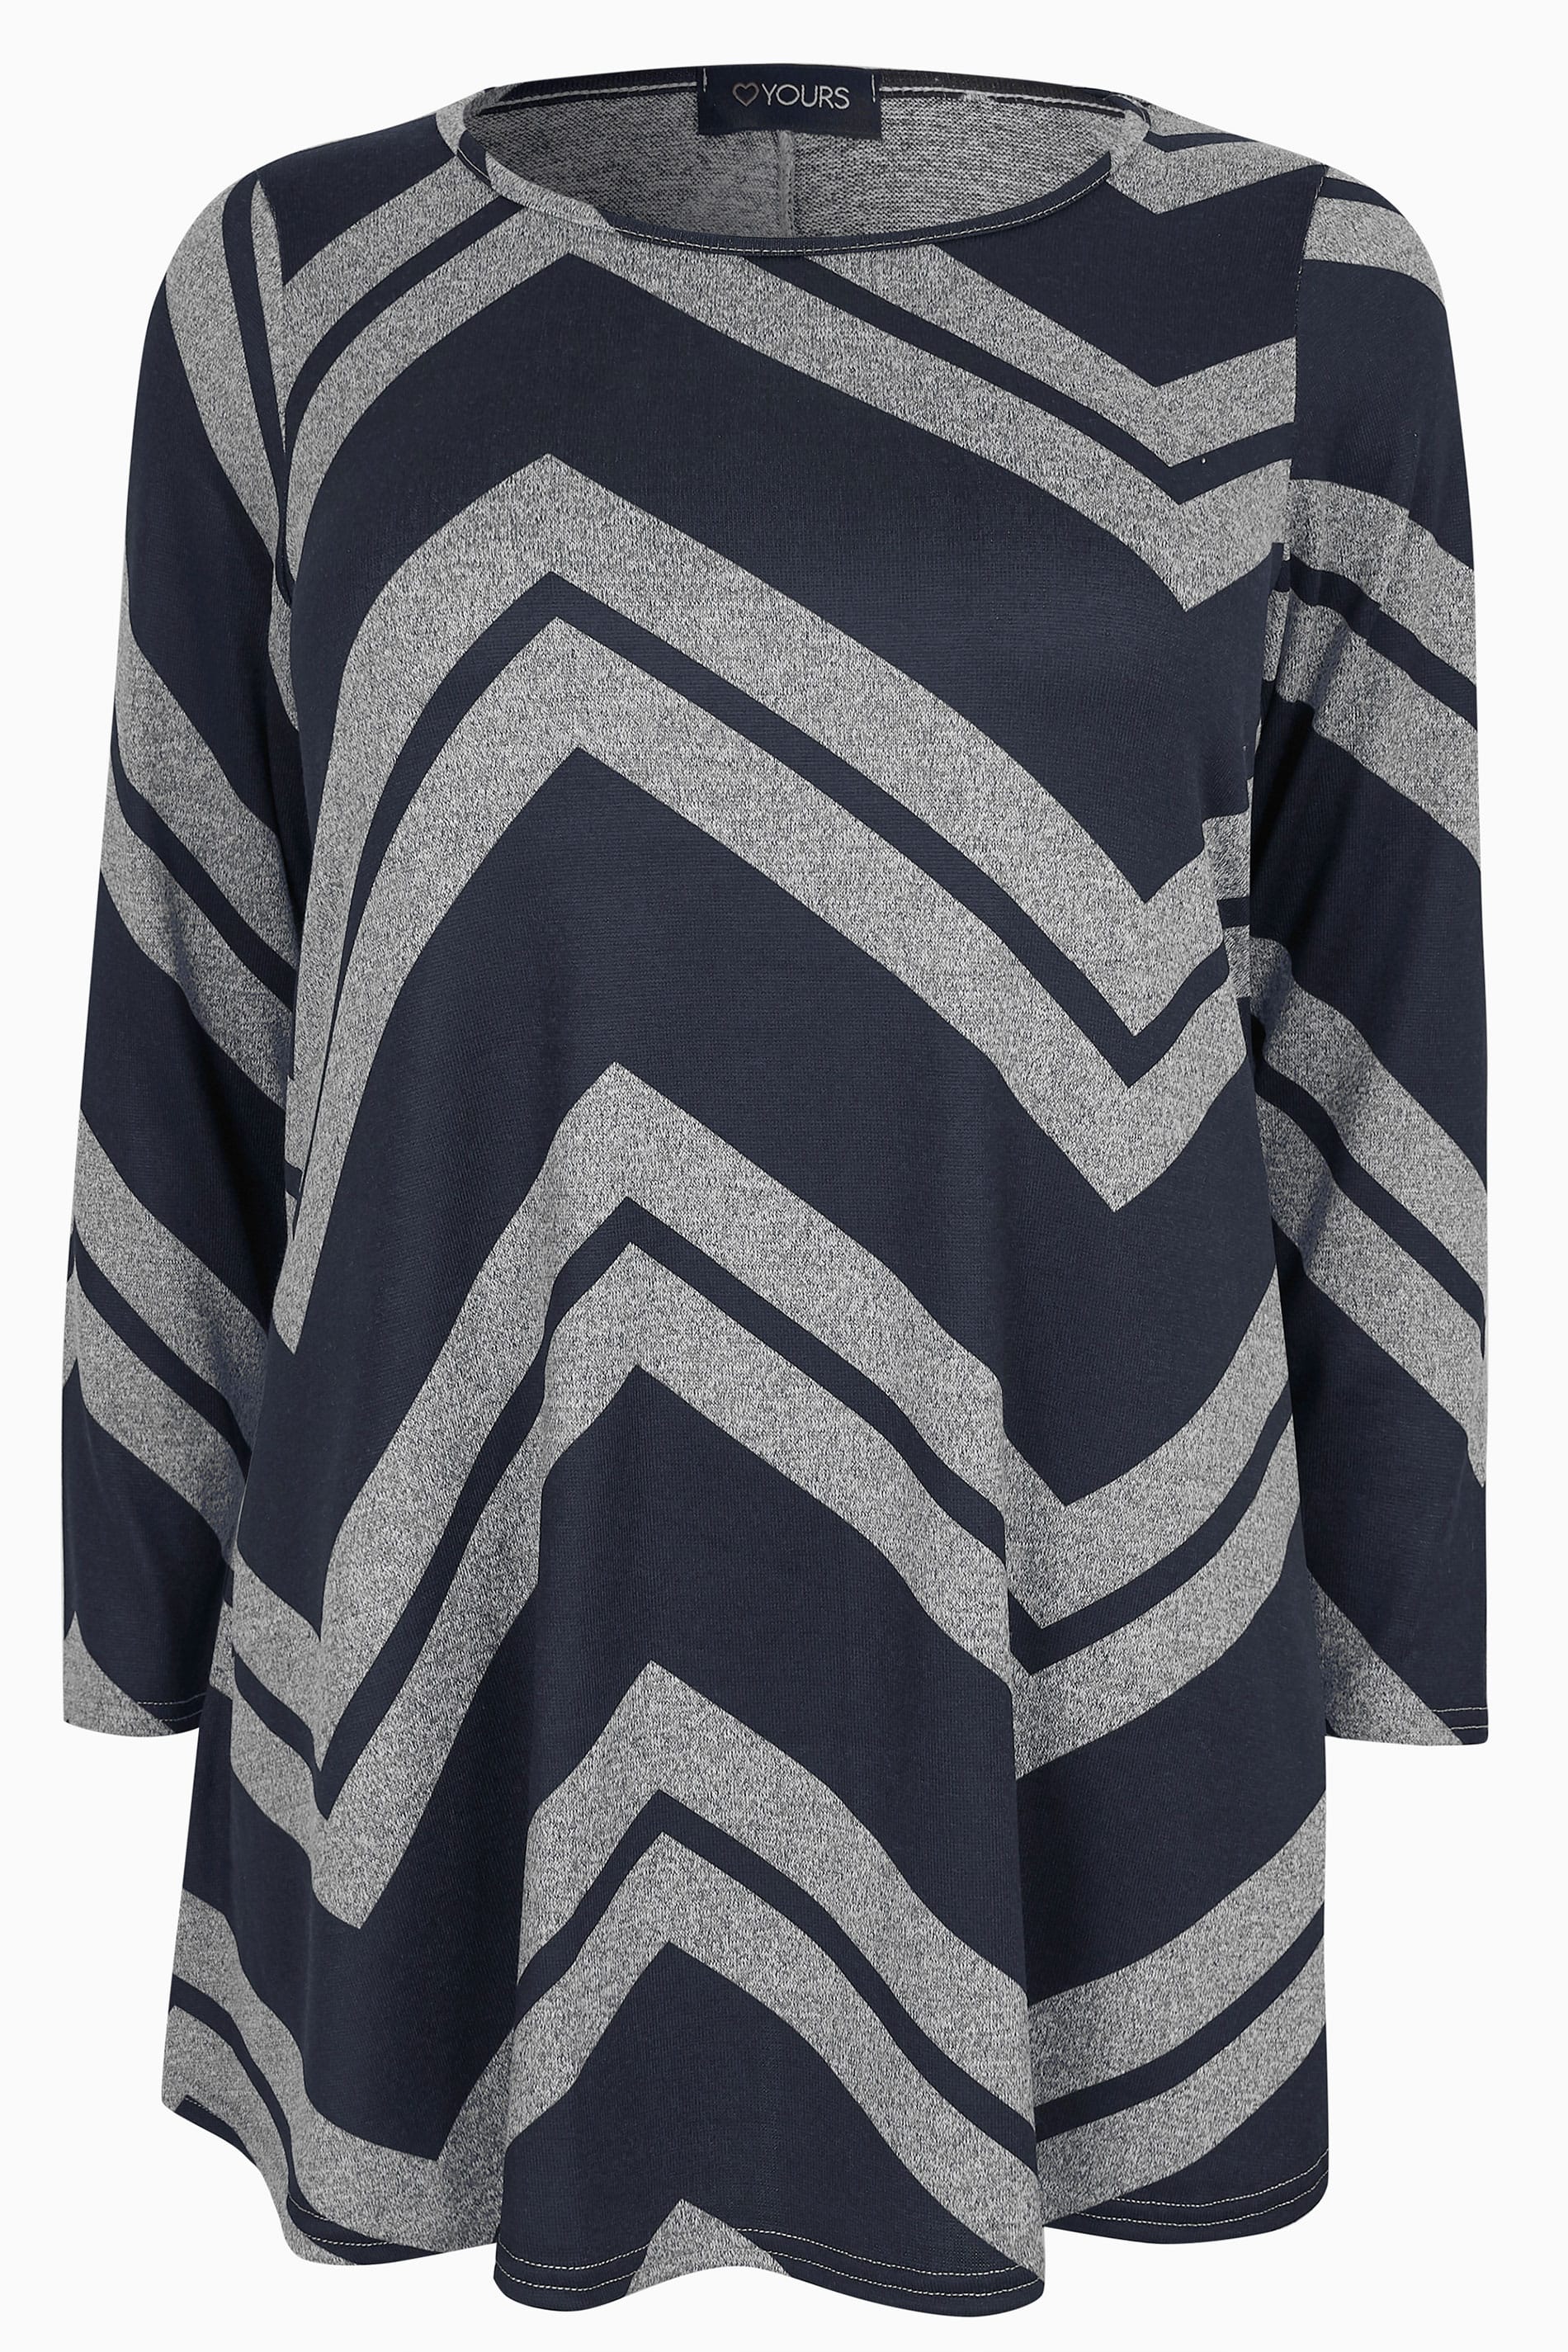 Navy Chevron Swing Top | Sizes 16 to 36 | Yours Clothing